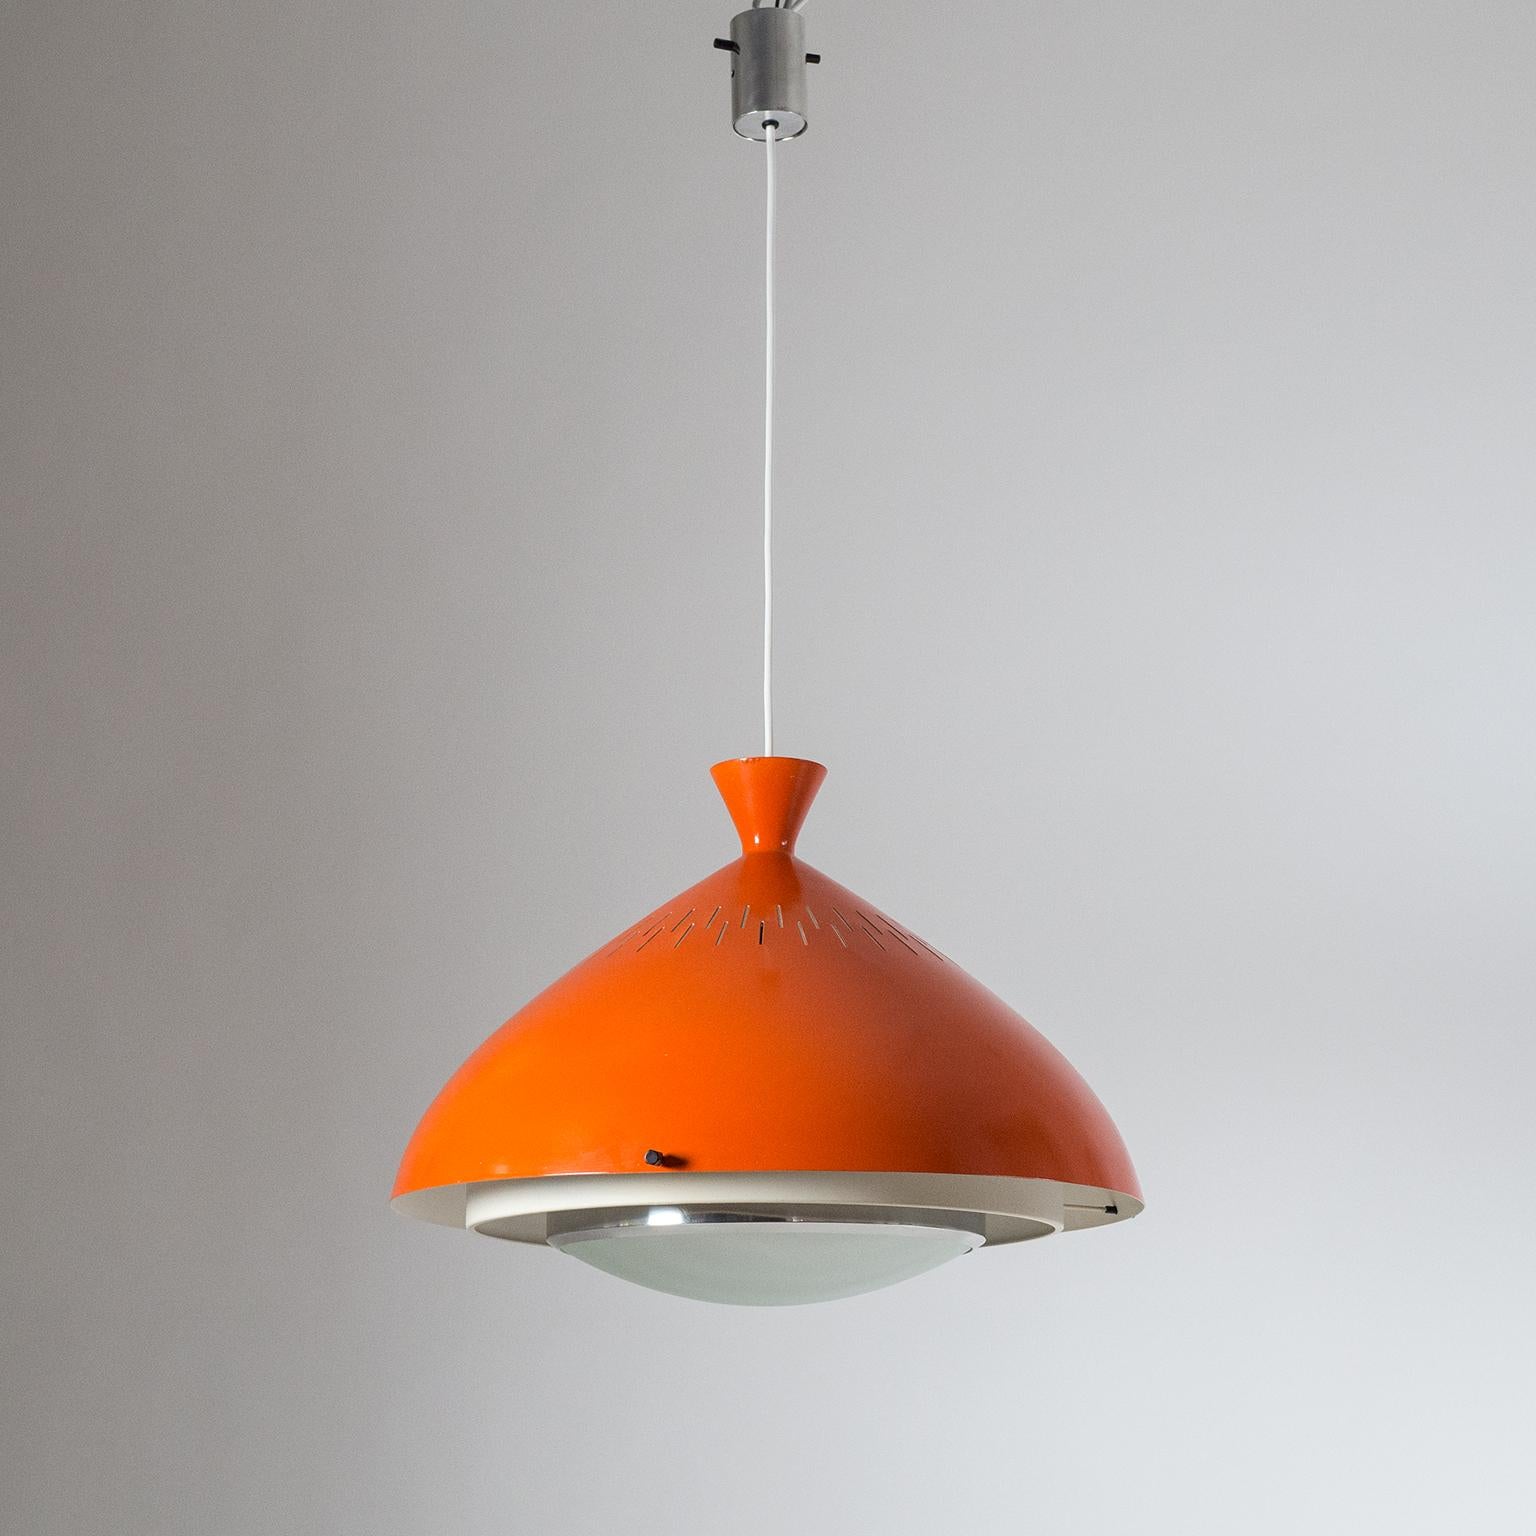 Very rare Stilnovo pendant from the late 1950s. The oversize aluminum shade is lacquered in a strong dark orange on the outside and off-white on the inside. Underneath is a tiered structure of white lacquered and polished aluminum rims with a curved